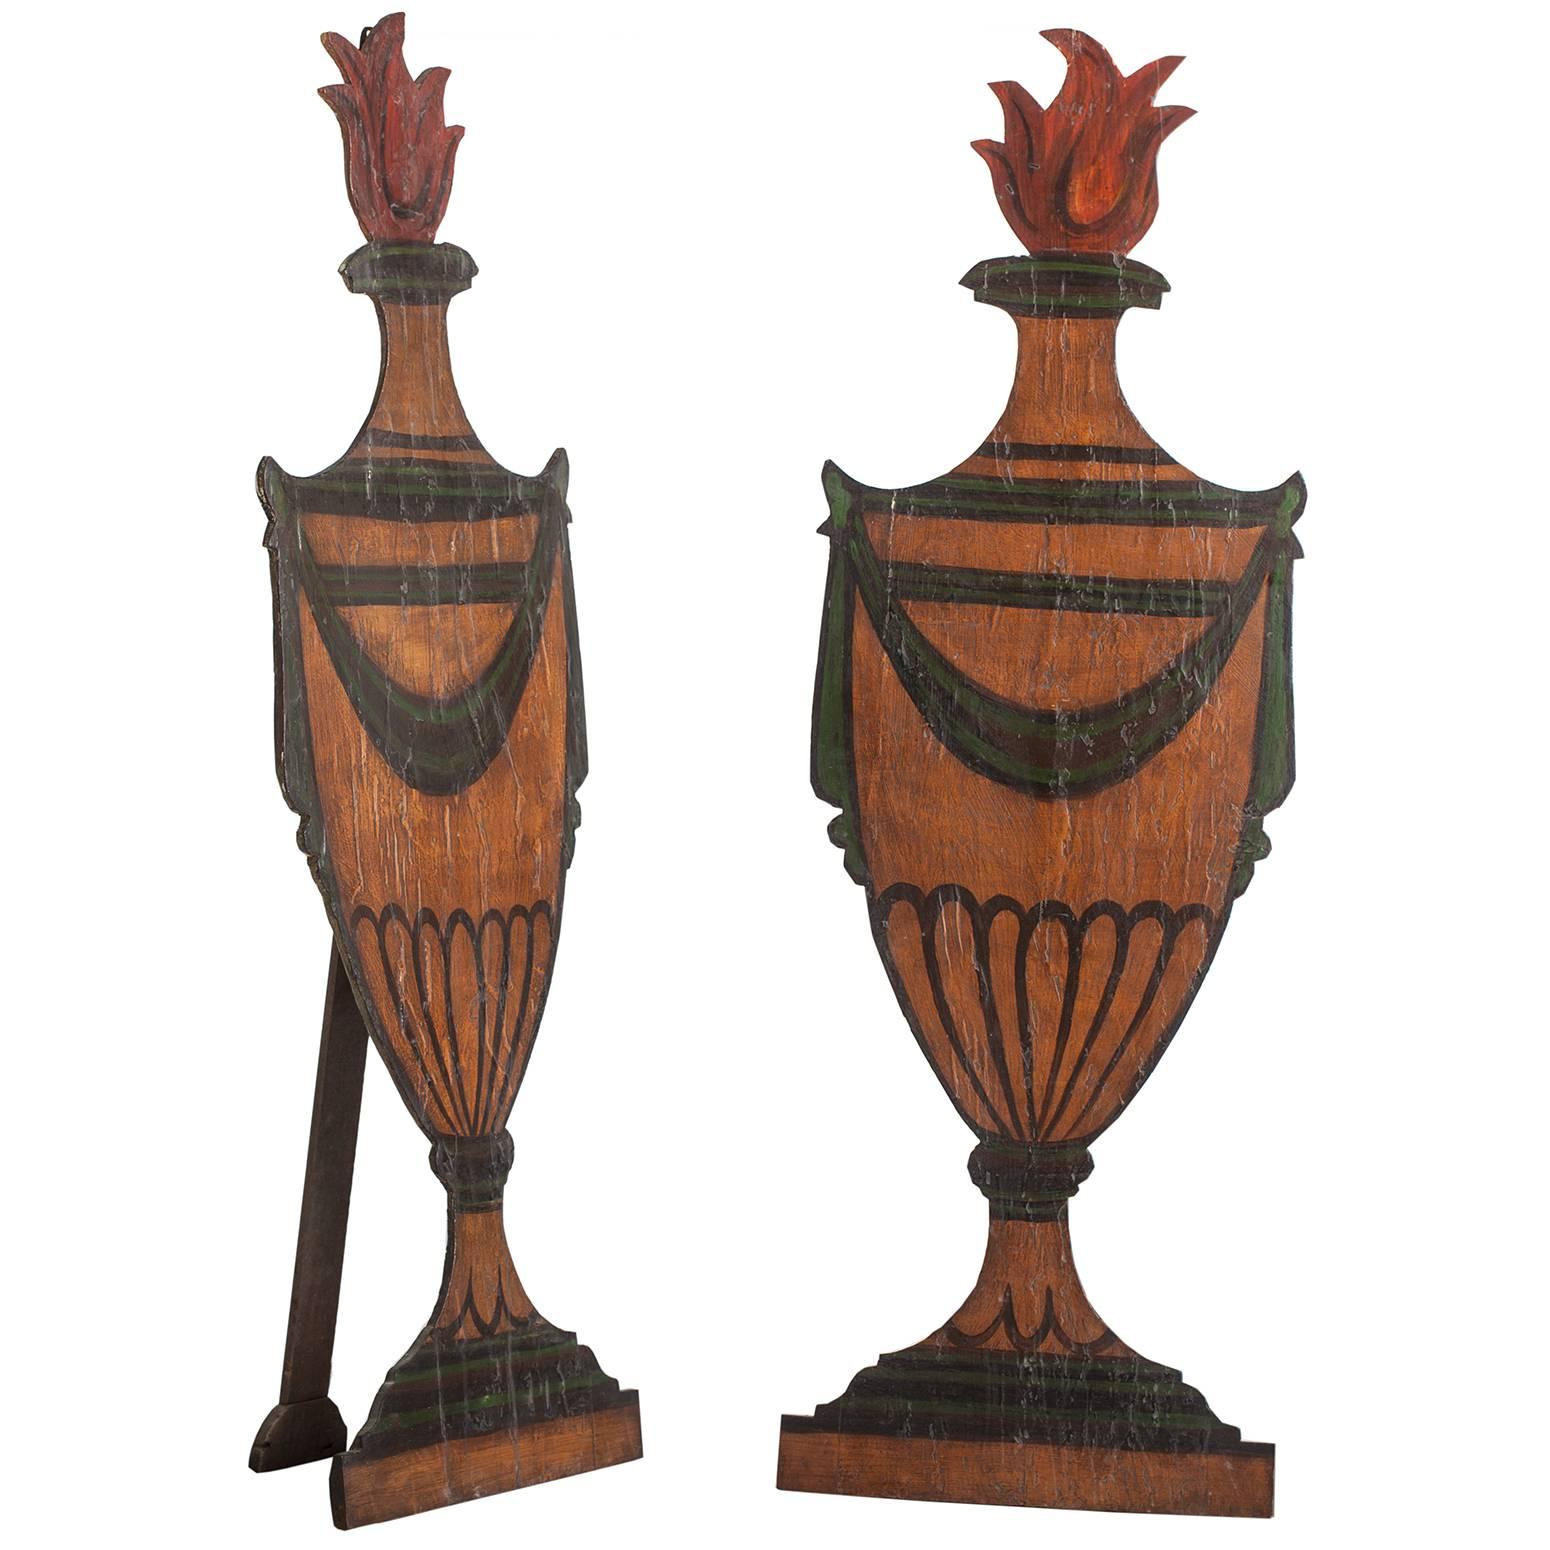 Pair of French Painted Wood Two Dimensional Urns, circa 1880